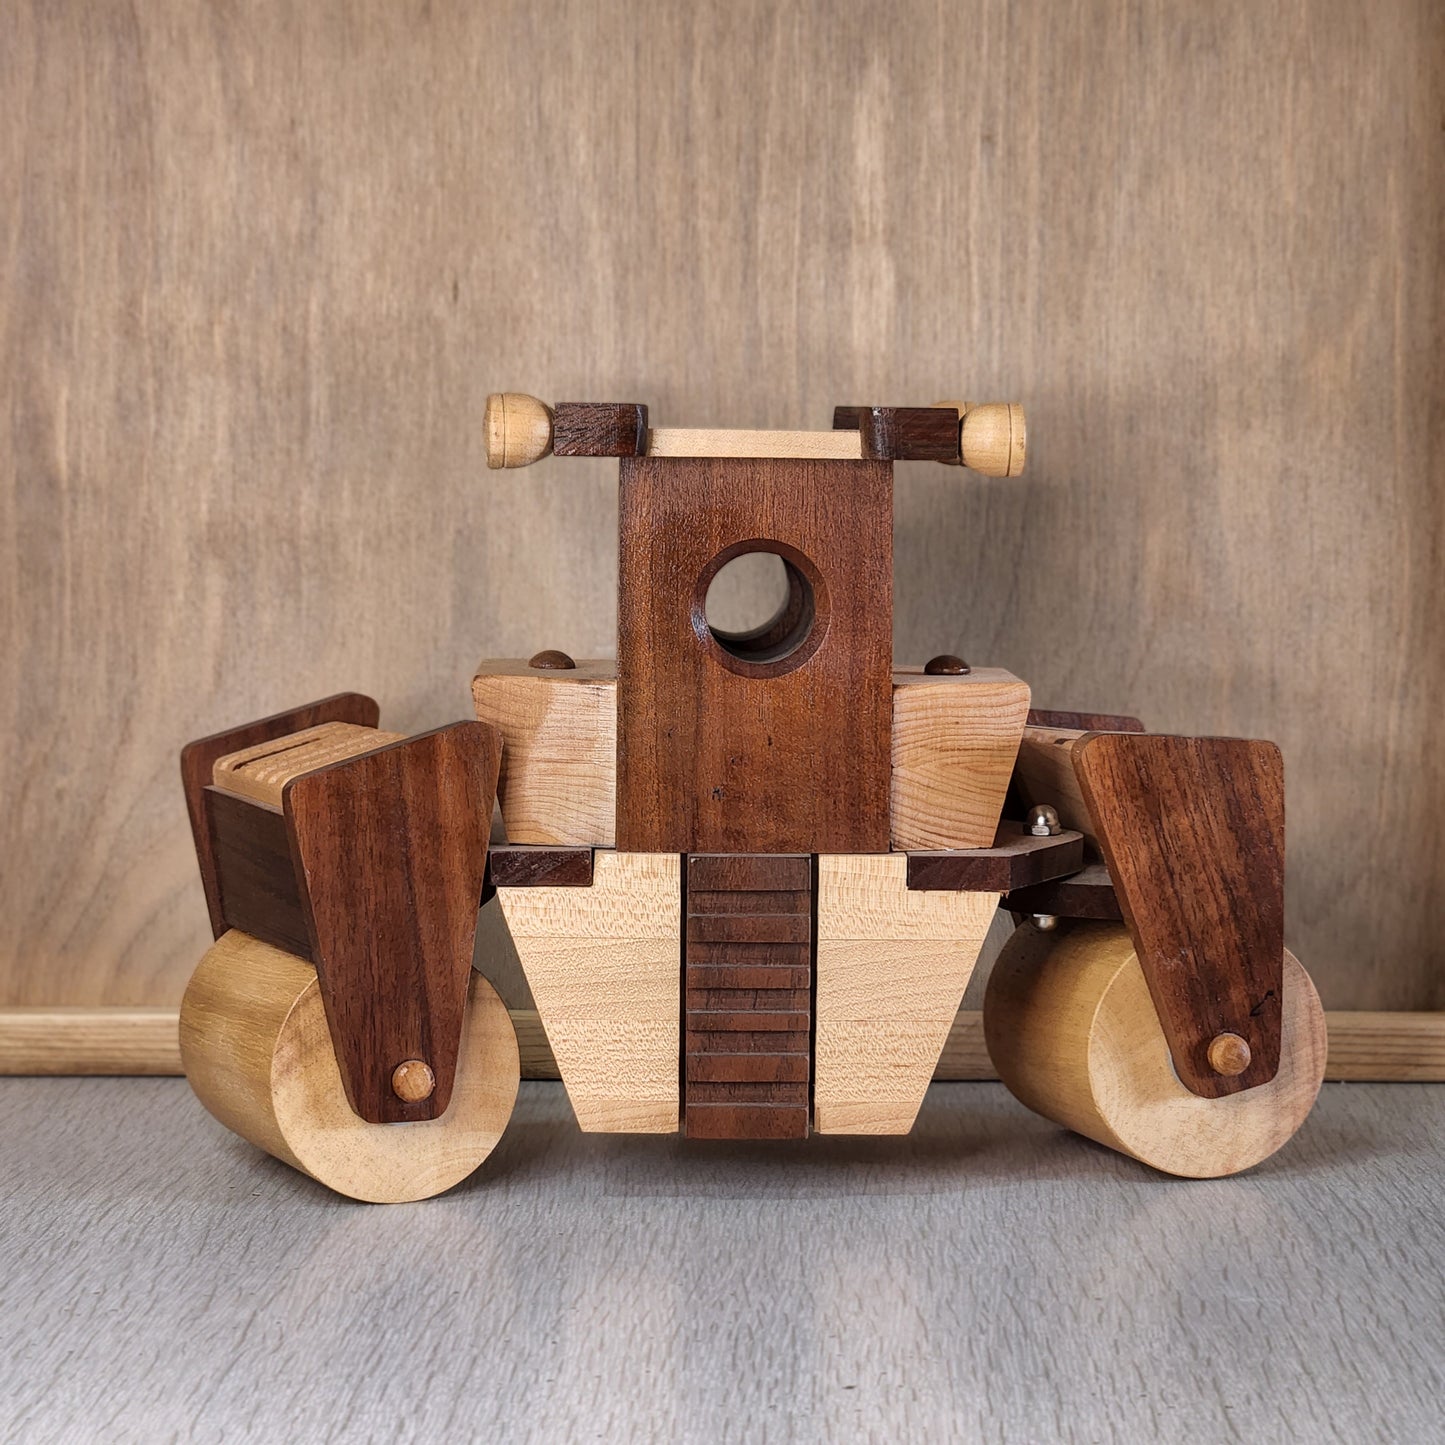 Wooden Toys/Displays